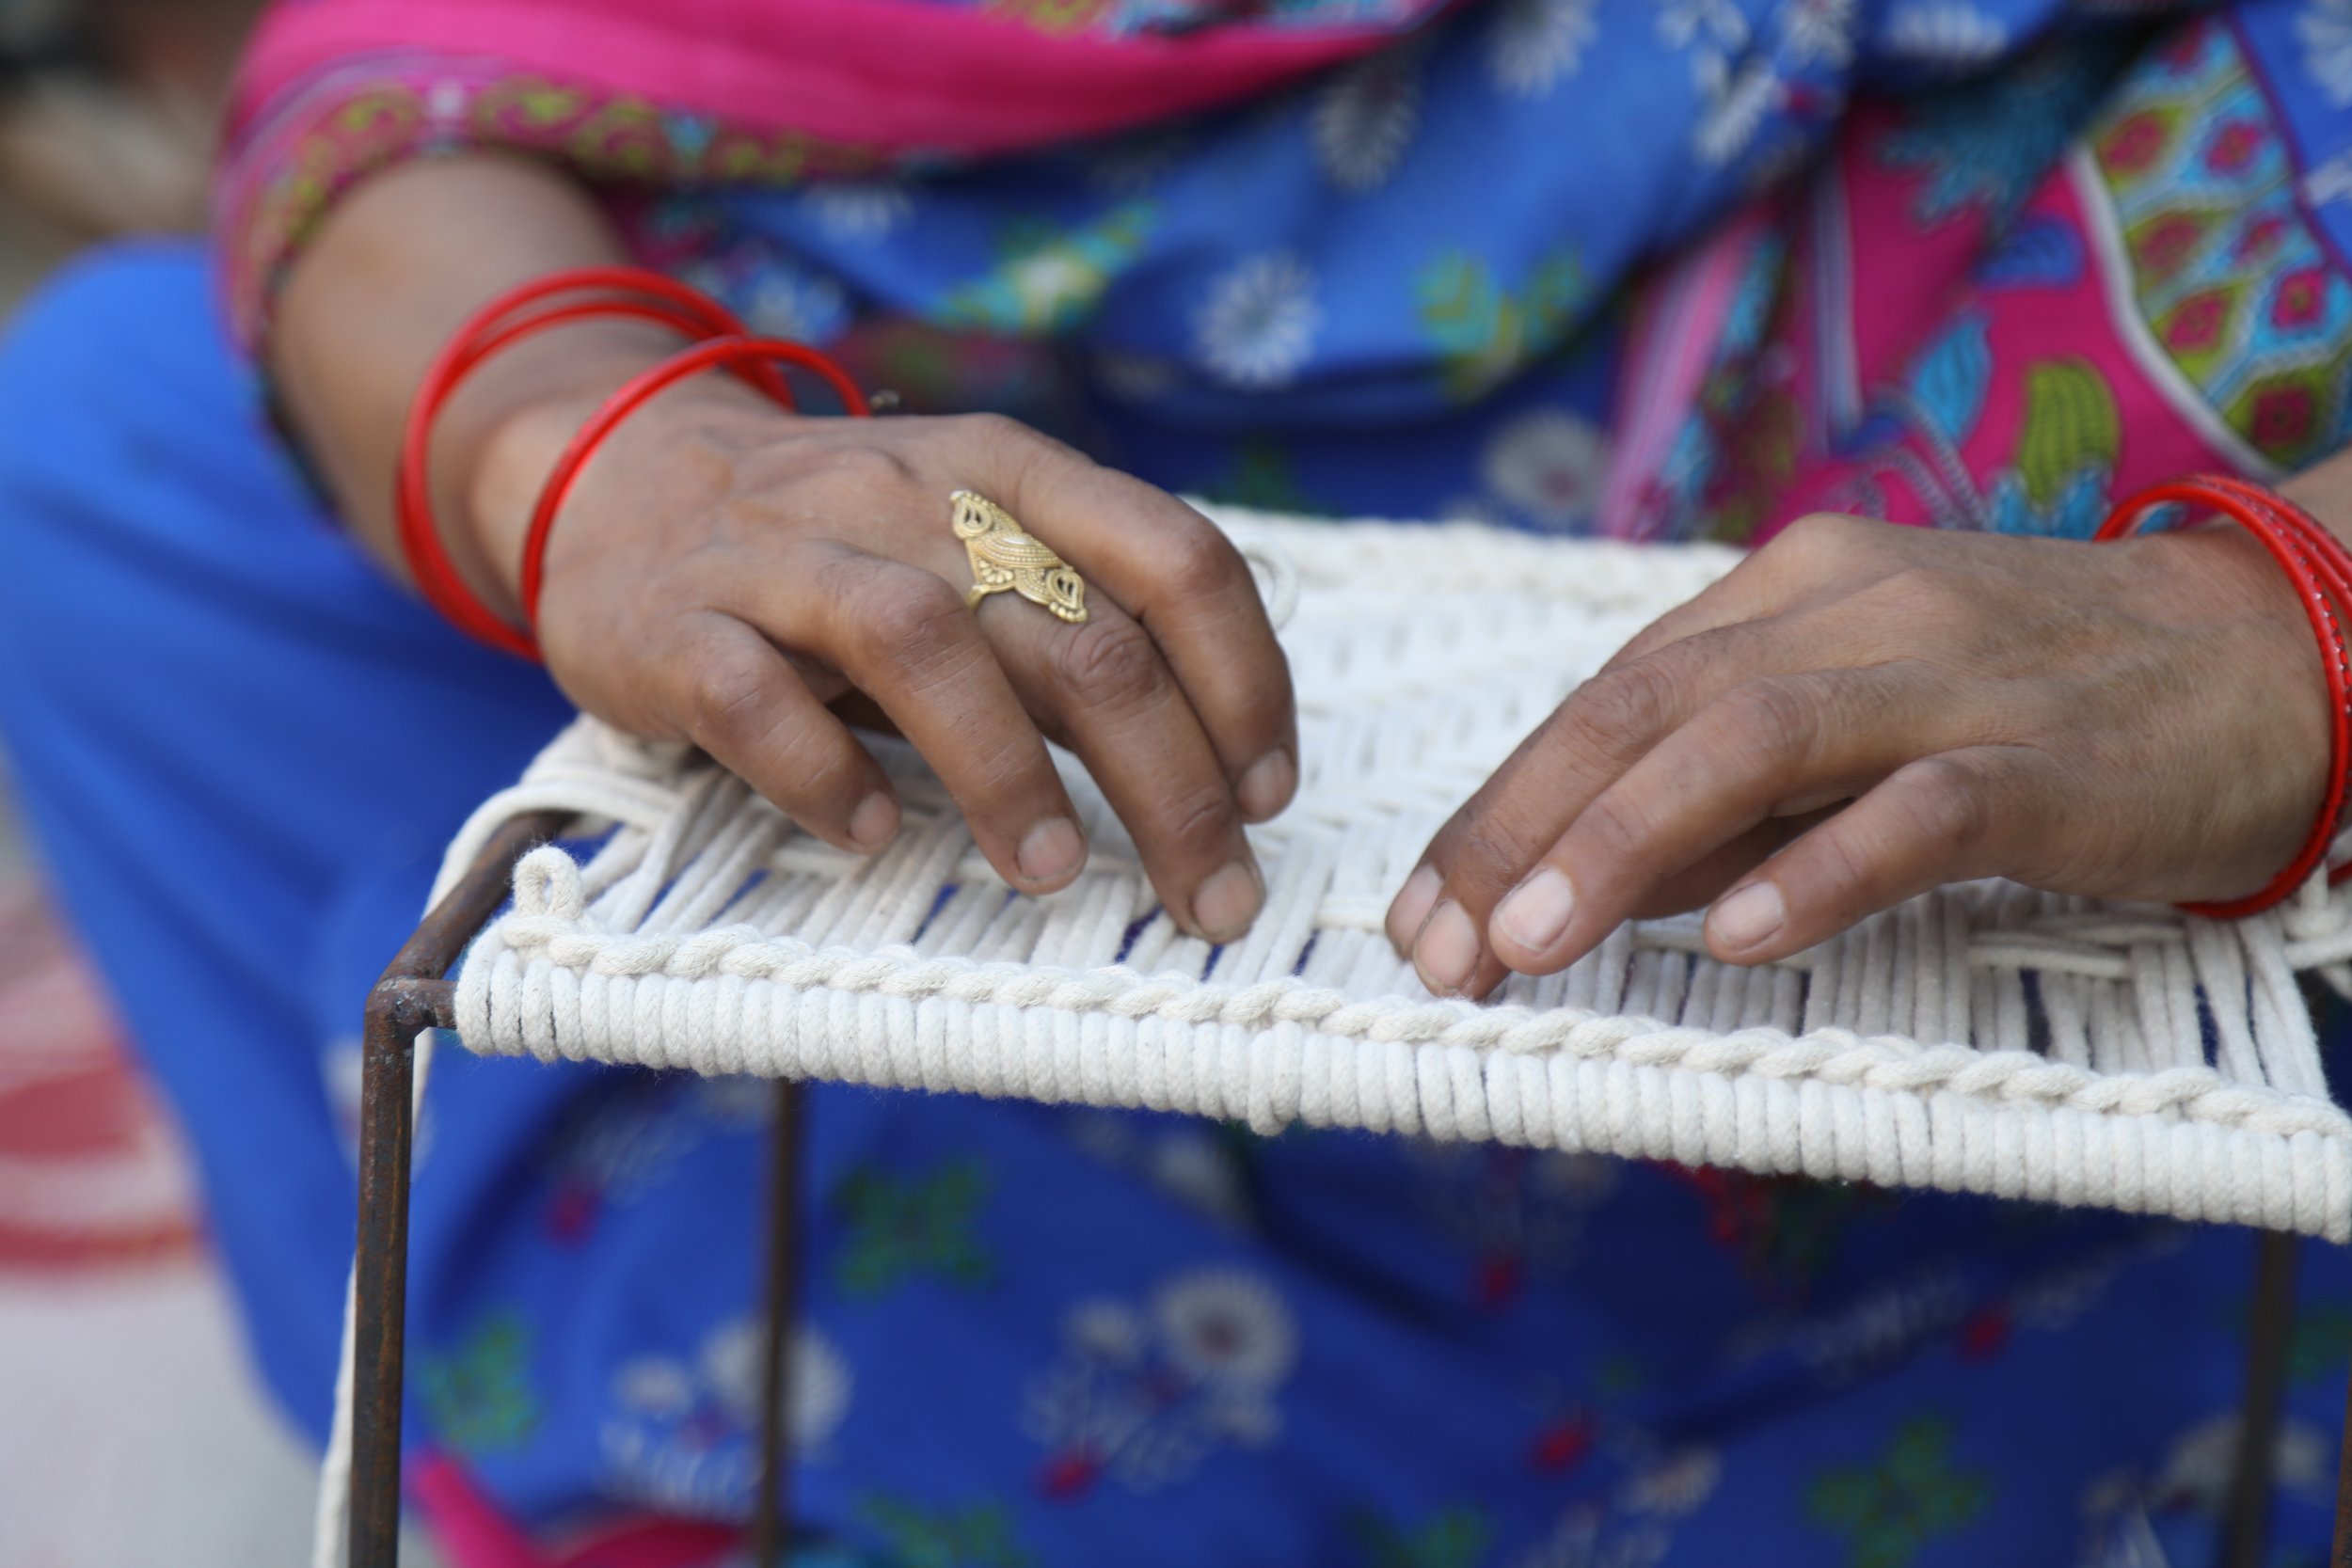 Women weavers help produce dozens of products a day for Sirohi that include trays, benches, chairs, stools, and boxes. They earn approximately 10-15,000 rupees a month.